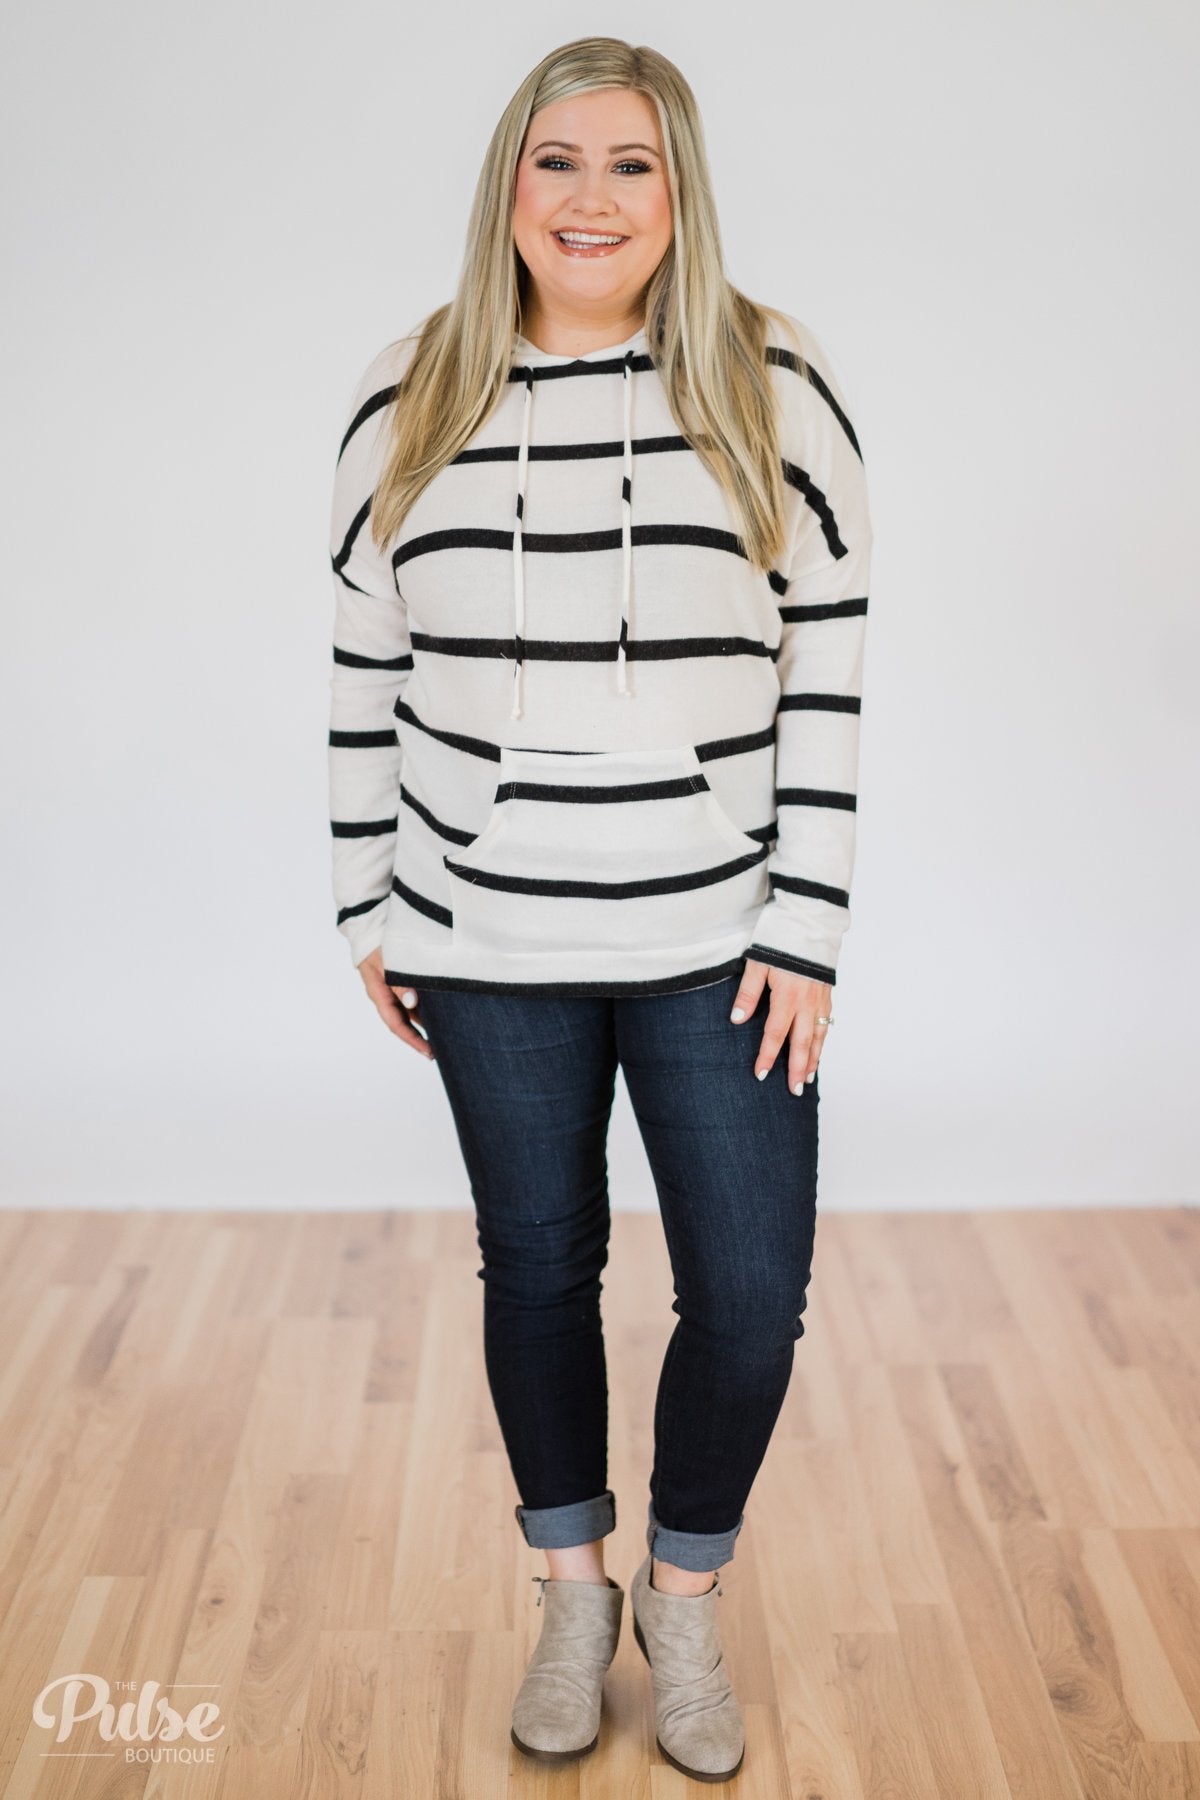 Your Soft Touch Striped Hoodie- White & Black